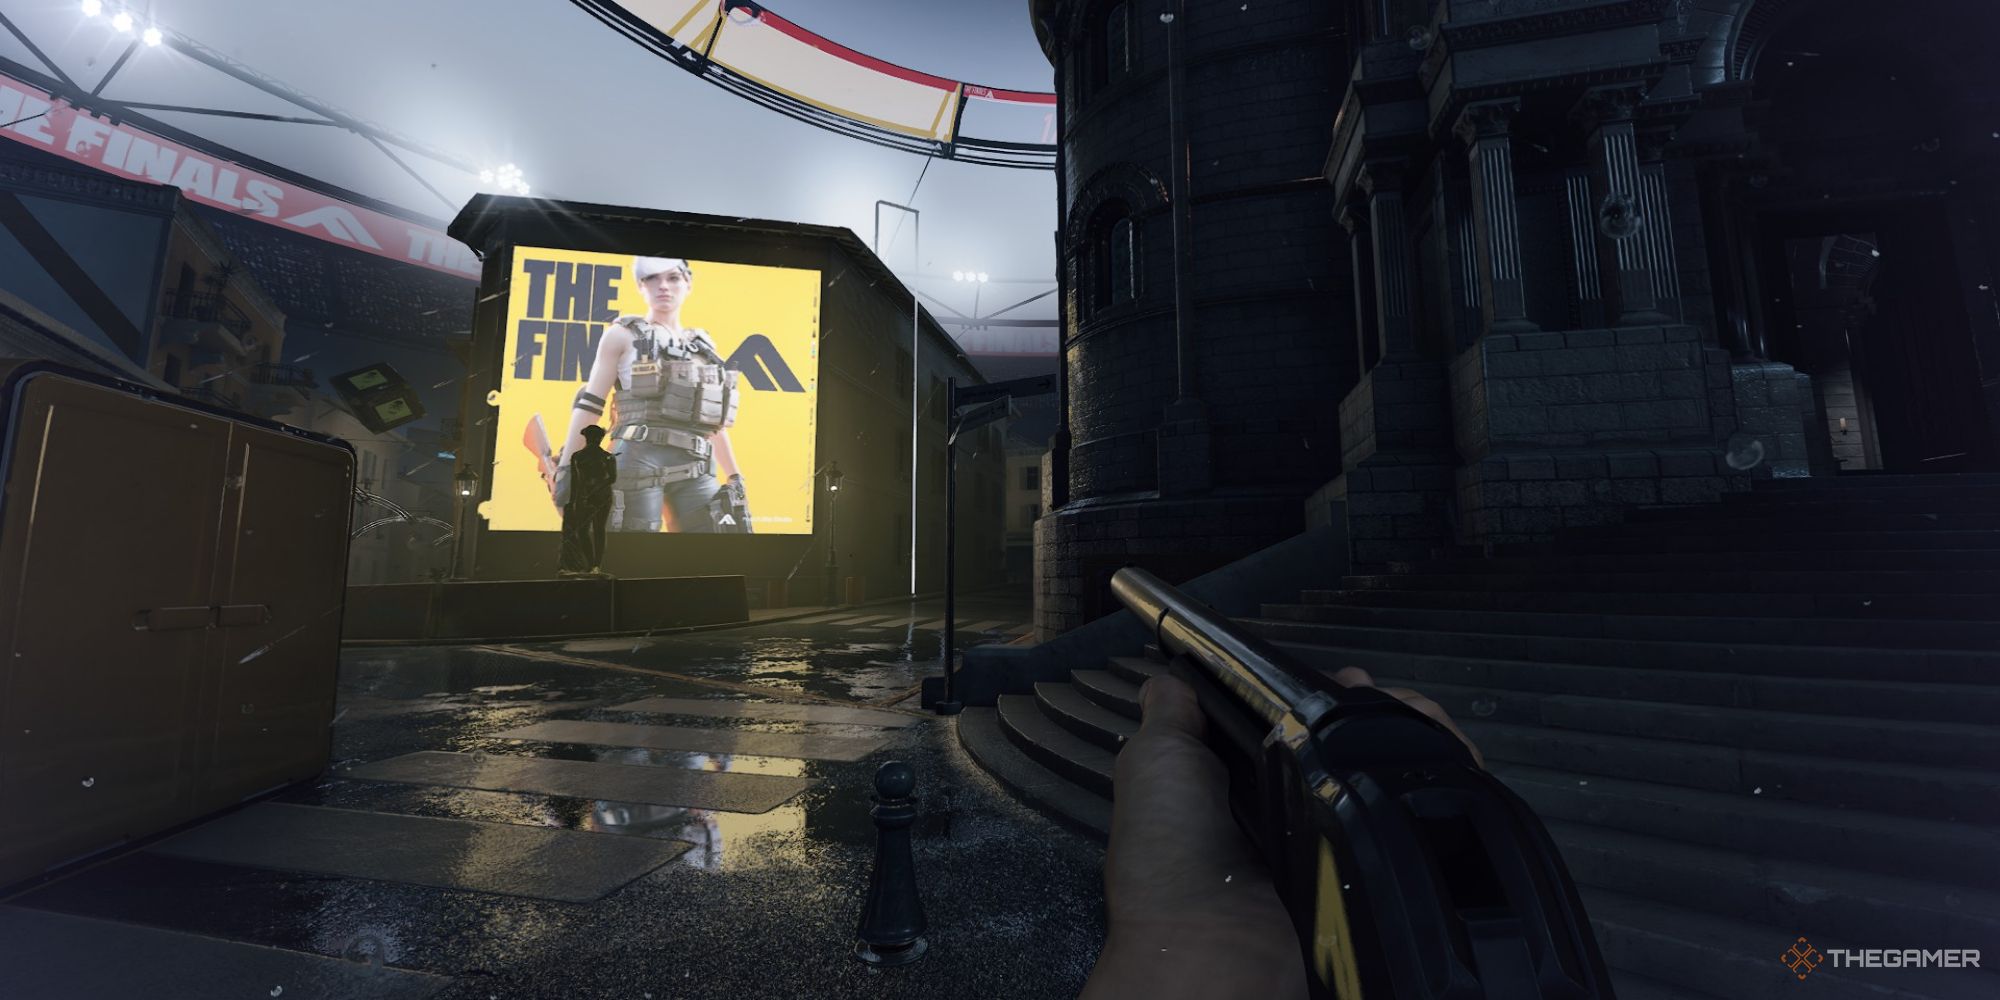 A screenshot from The Finals showing a player character holding a shotgun in the rain. The Finals advertisement can be seen a short distance away on a digital screen.